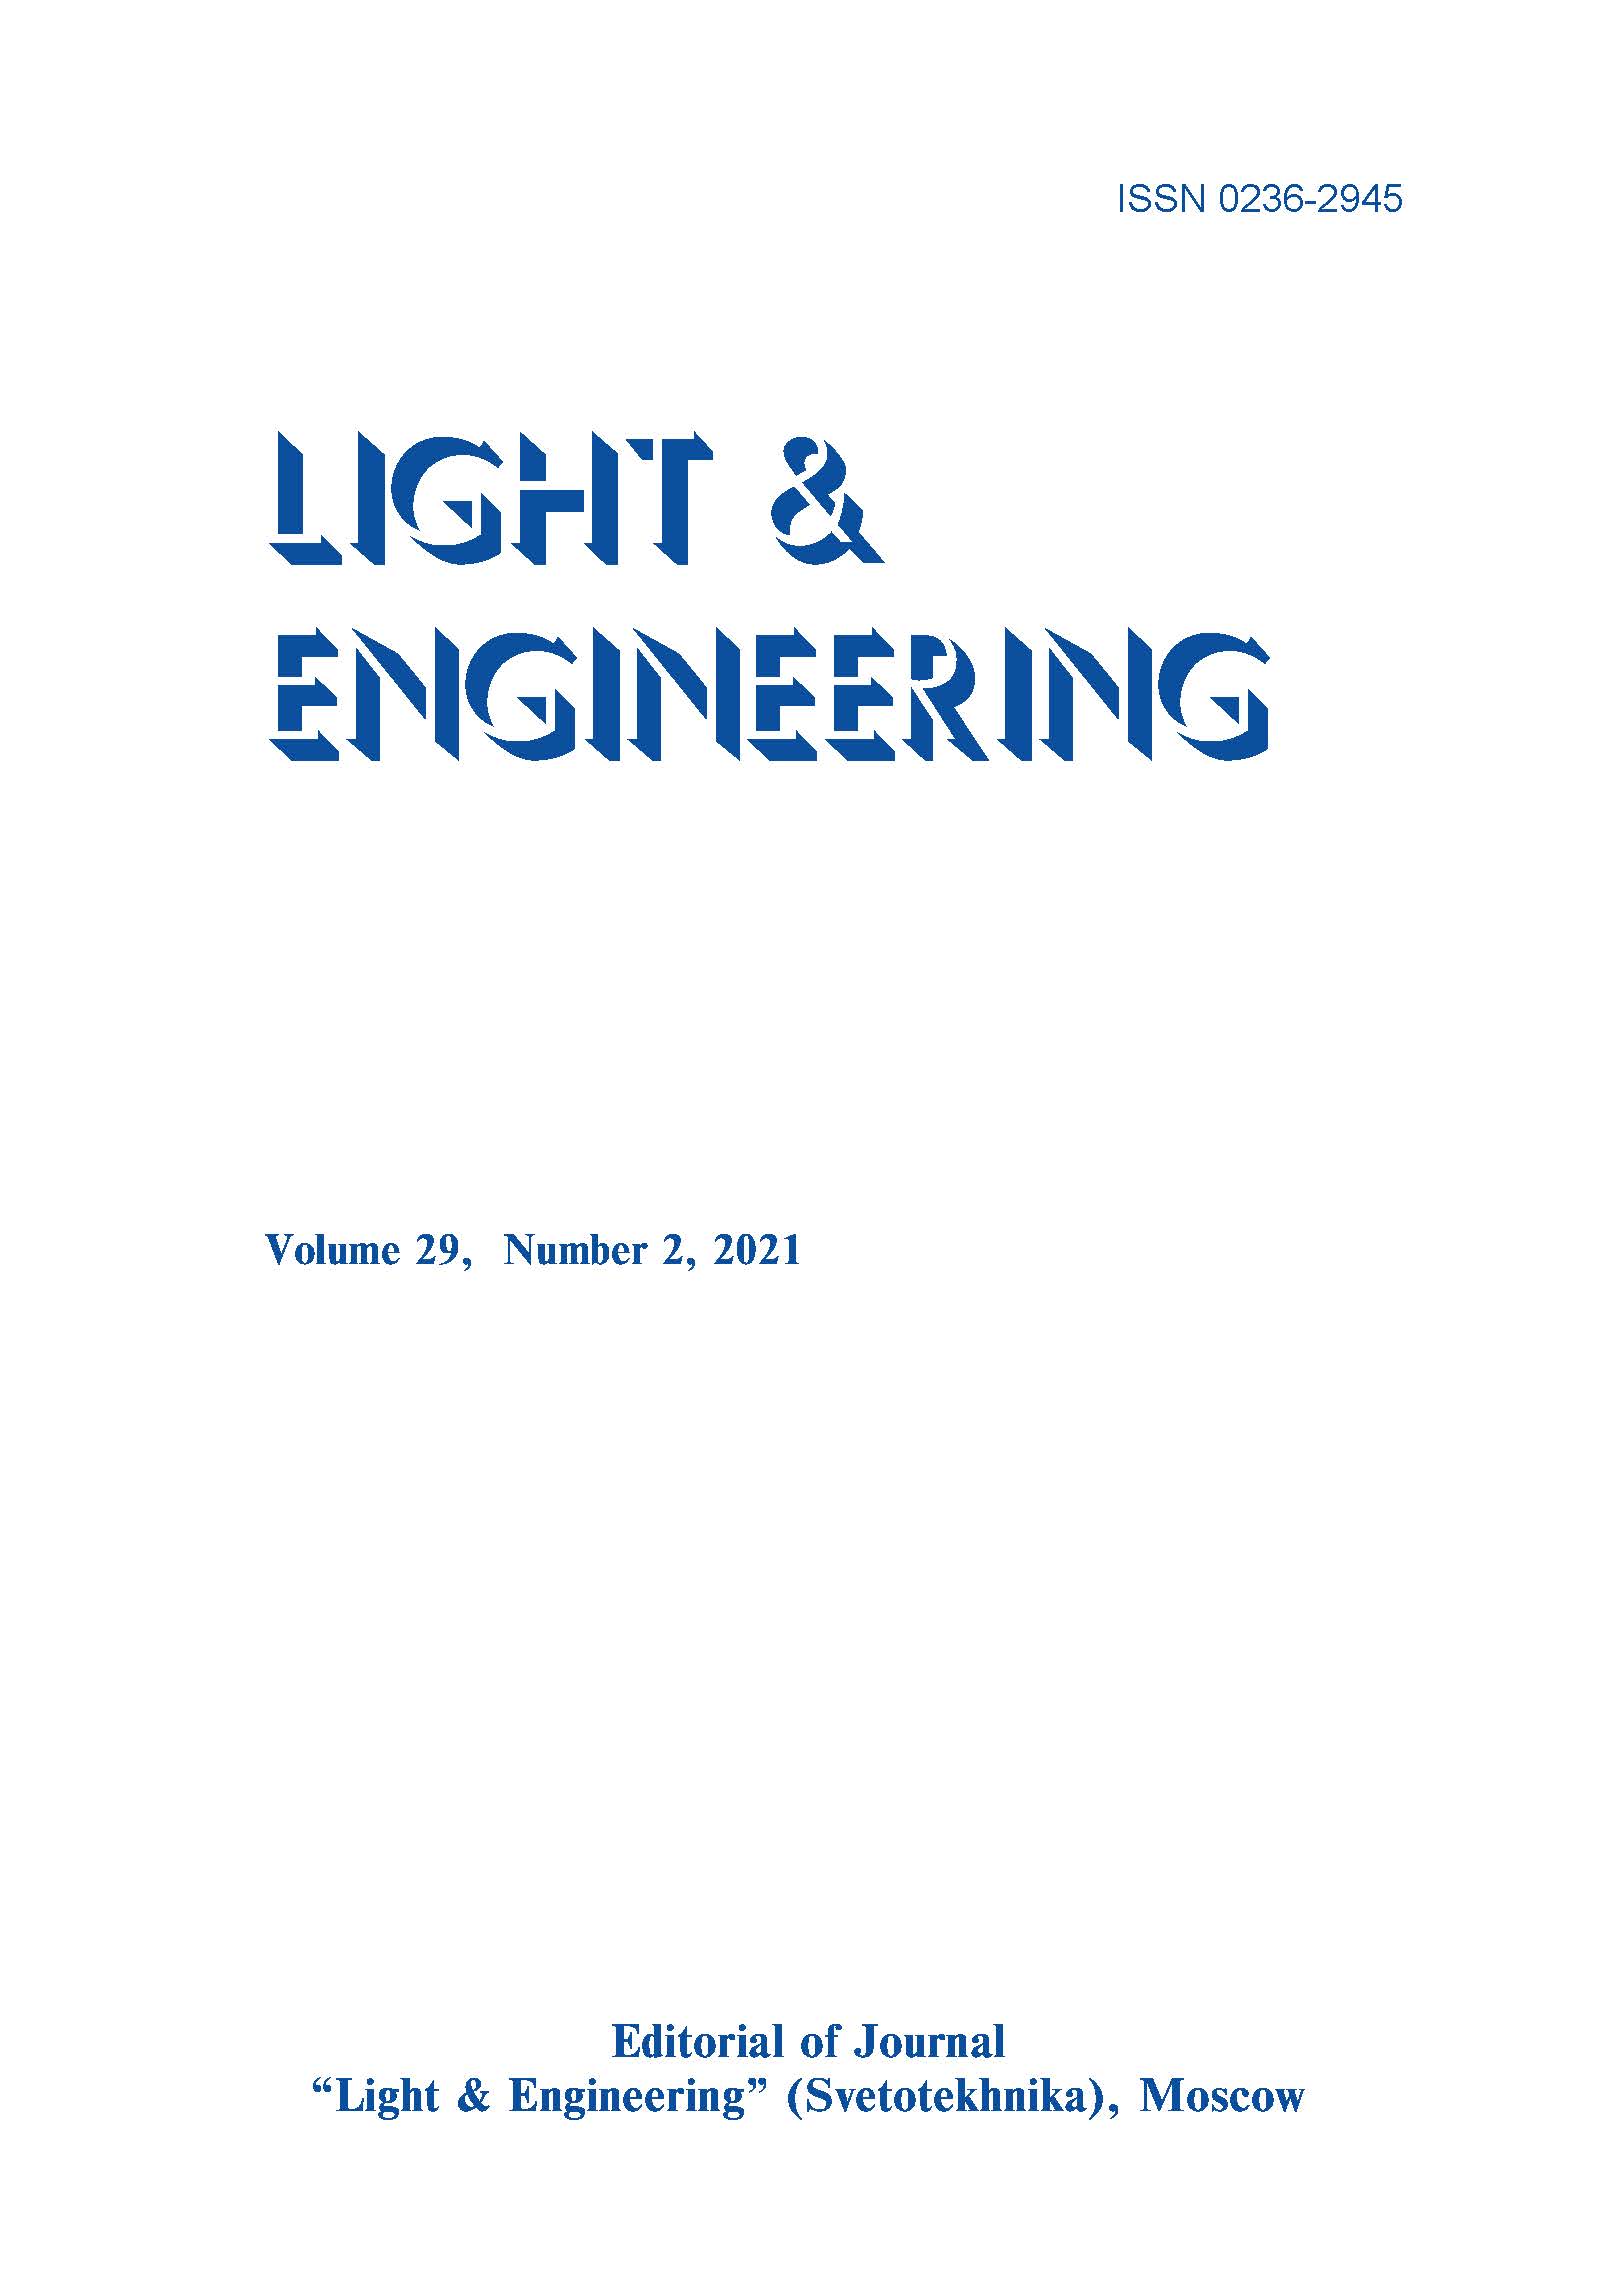 A Generalized Dynamic Conductance Model for High Intensity Discharge Lamps and its Prospective Application to Design Dimmable Electronic Ballast L&E, Vol. 29, No. 2, 2021